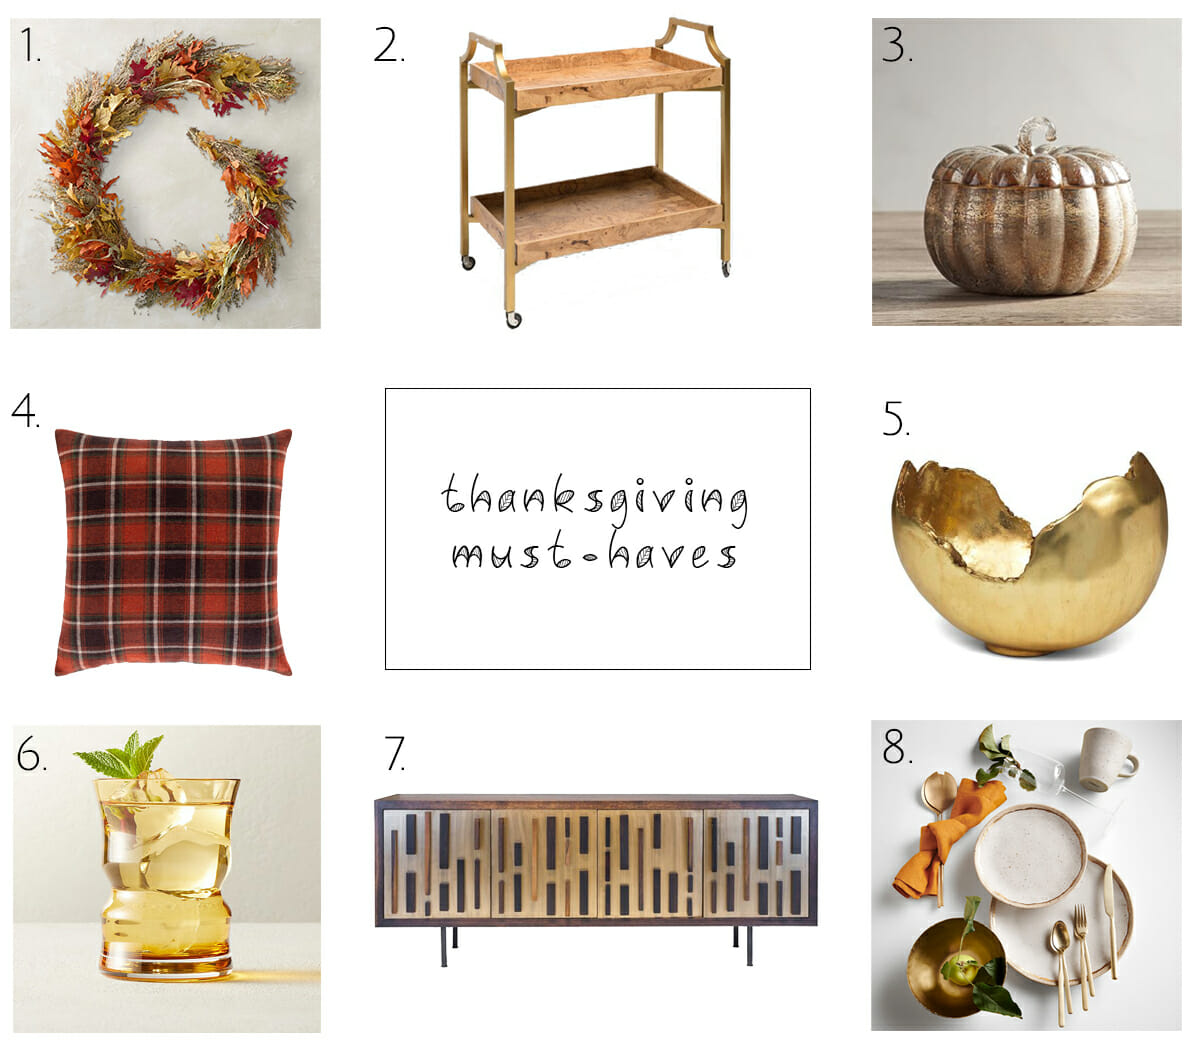 Top Decor to Decorate for Thanksgiving